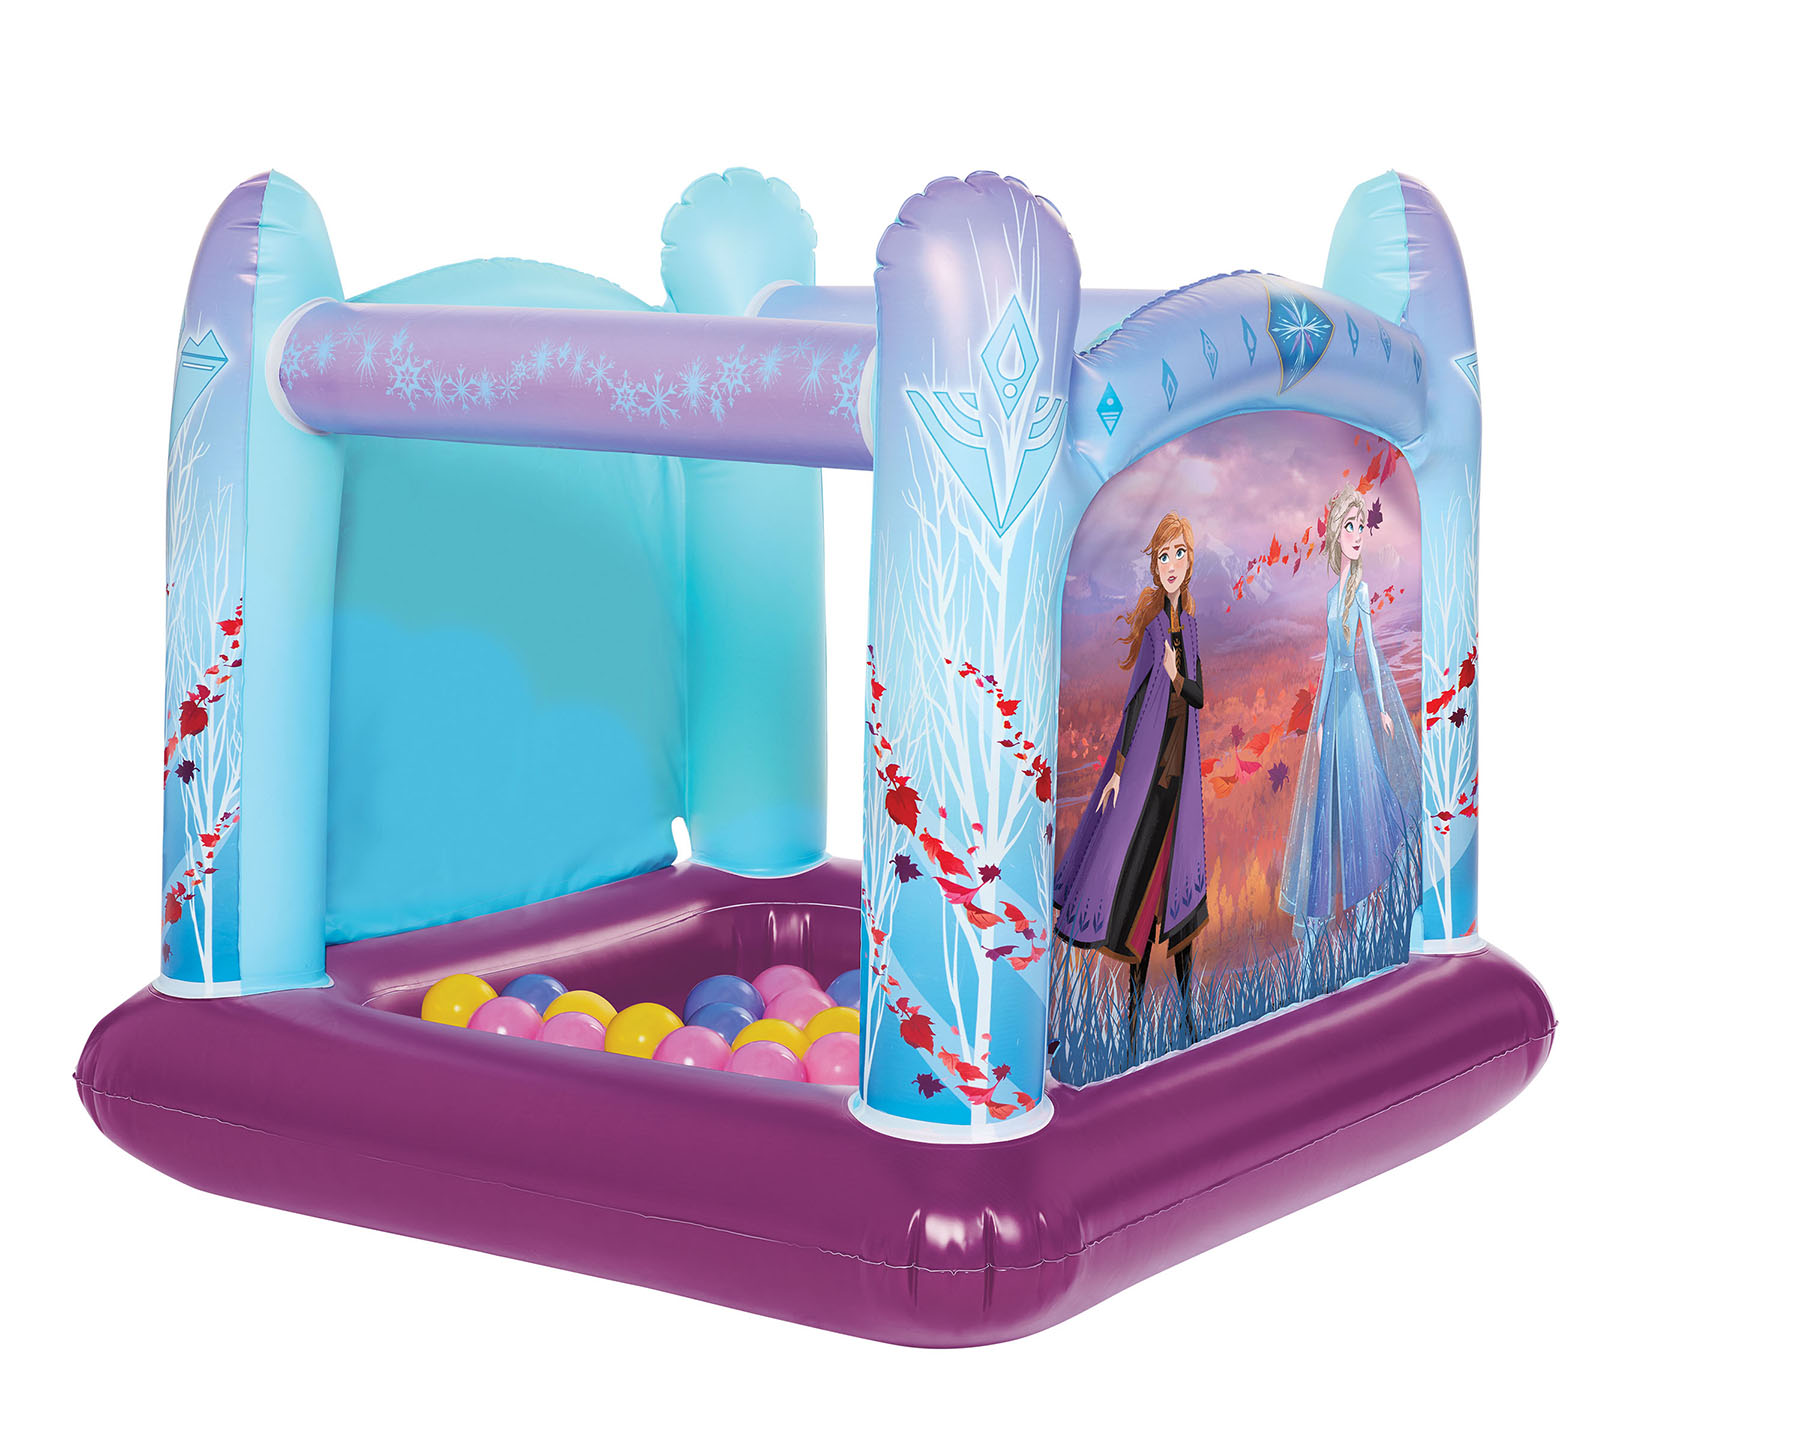 Disney Frozen 2: Playland Inflatable Ball Pit with 20 Balls - image 3 of 4